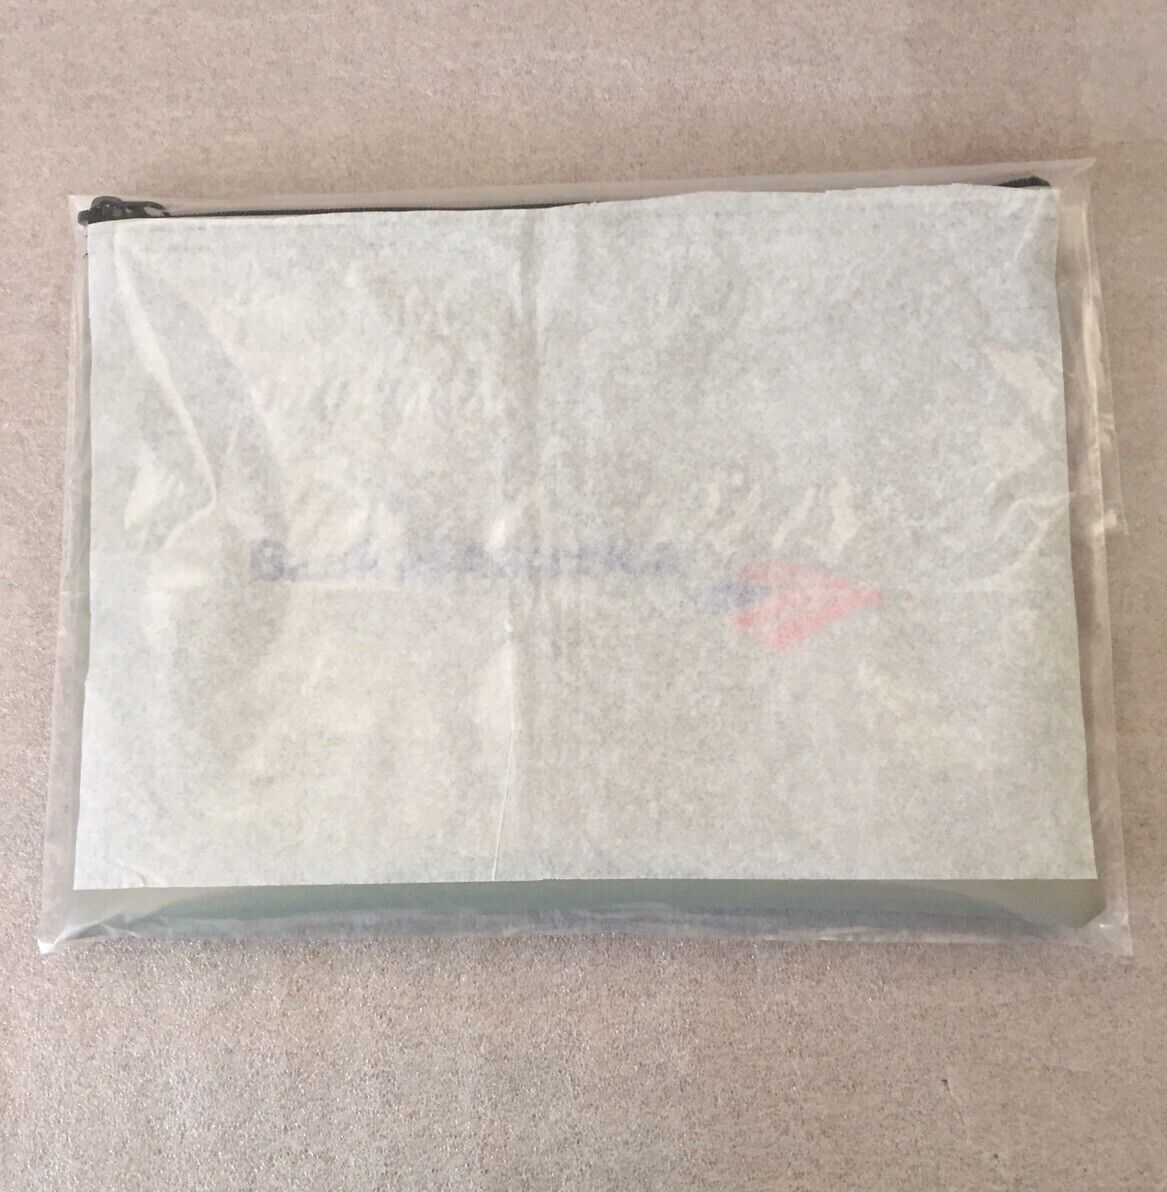 Brand New Authentic Large Bank Of America Bank Deposit Bag  Rare 9in X 12in